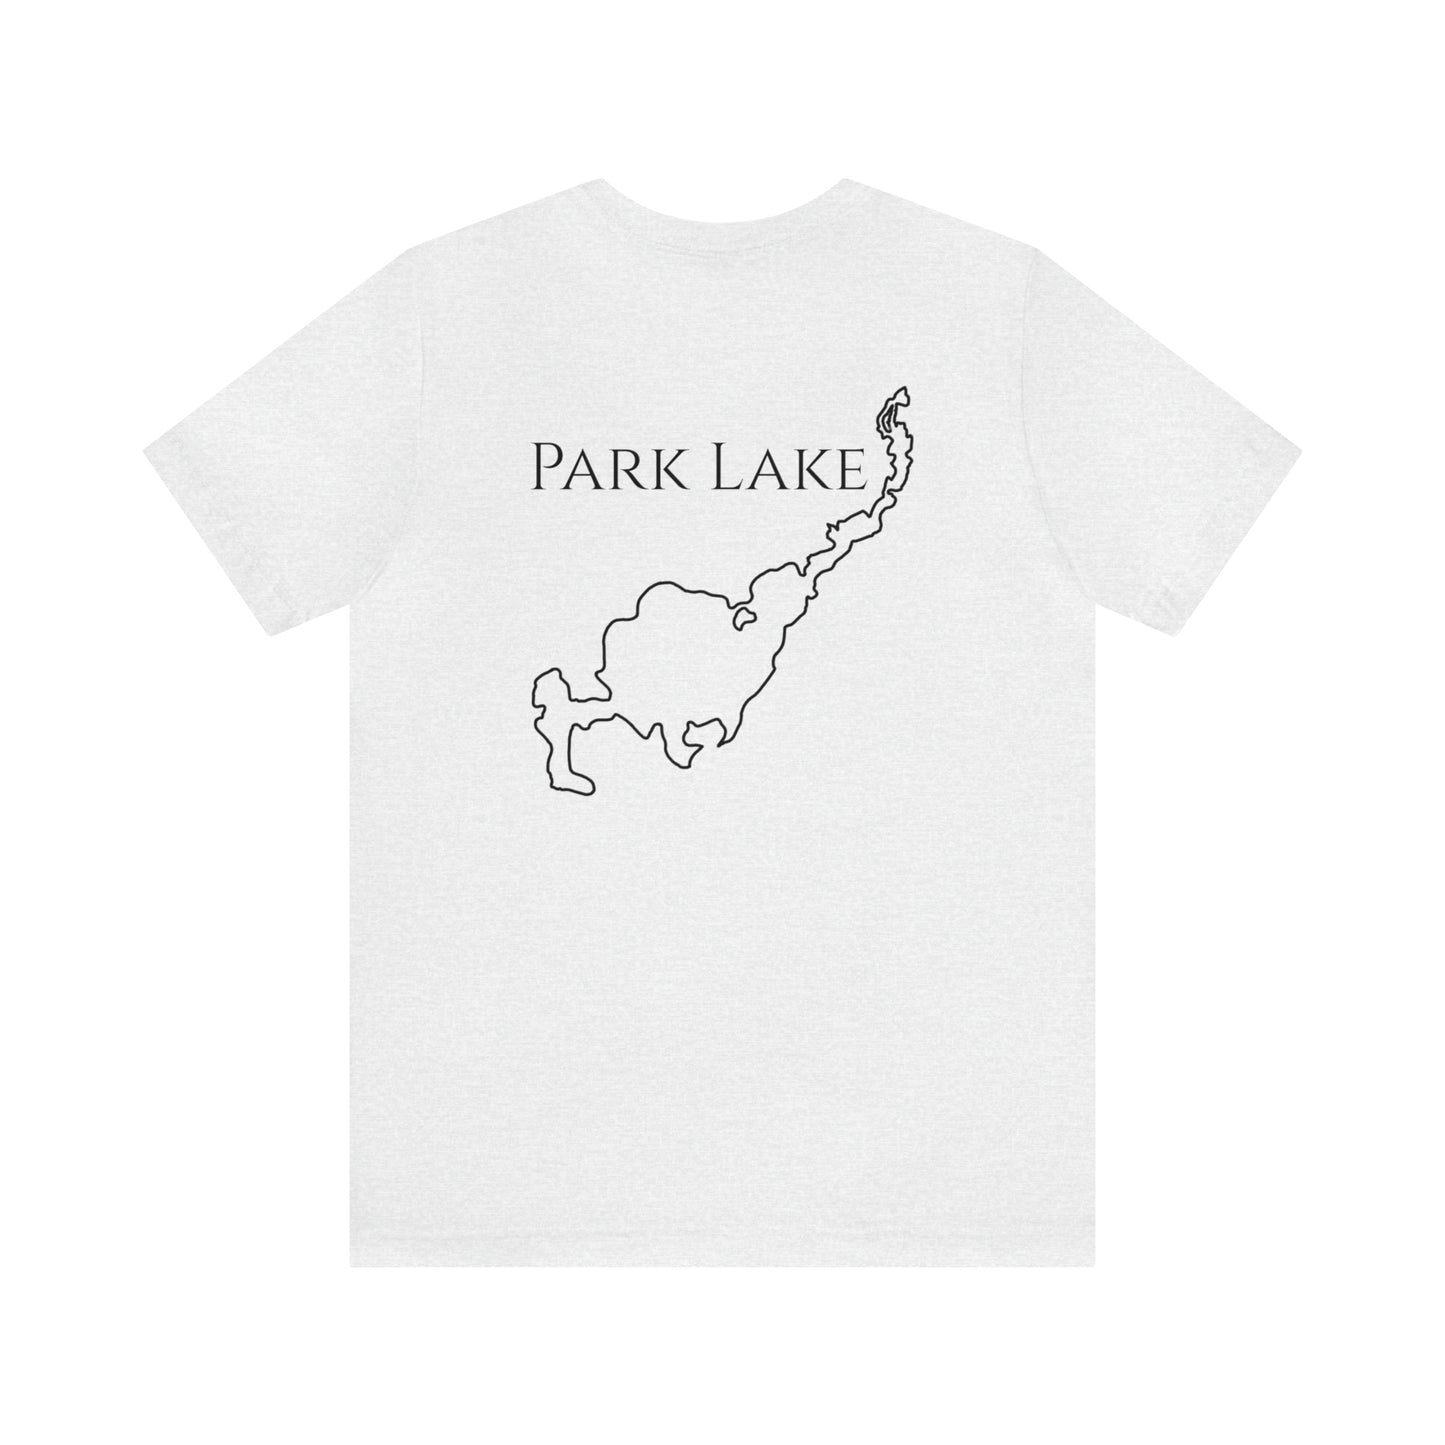 Fishing Off Dock Front Patch - Park Lake Unisex Lightweight Short Sleeve Tee